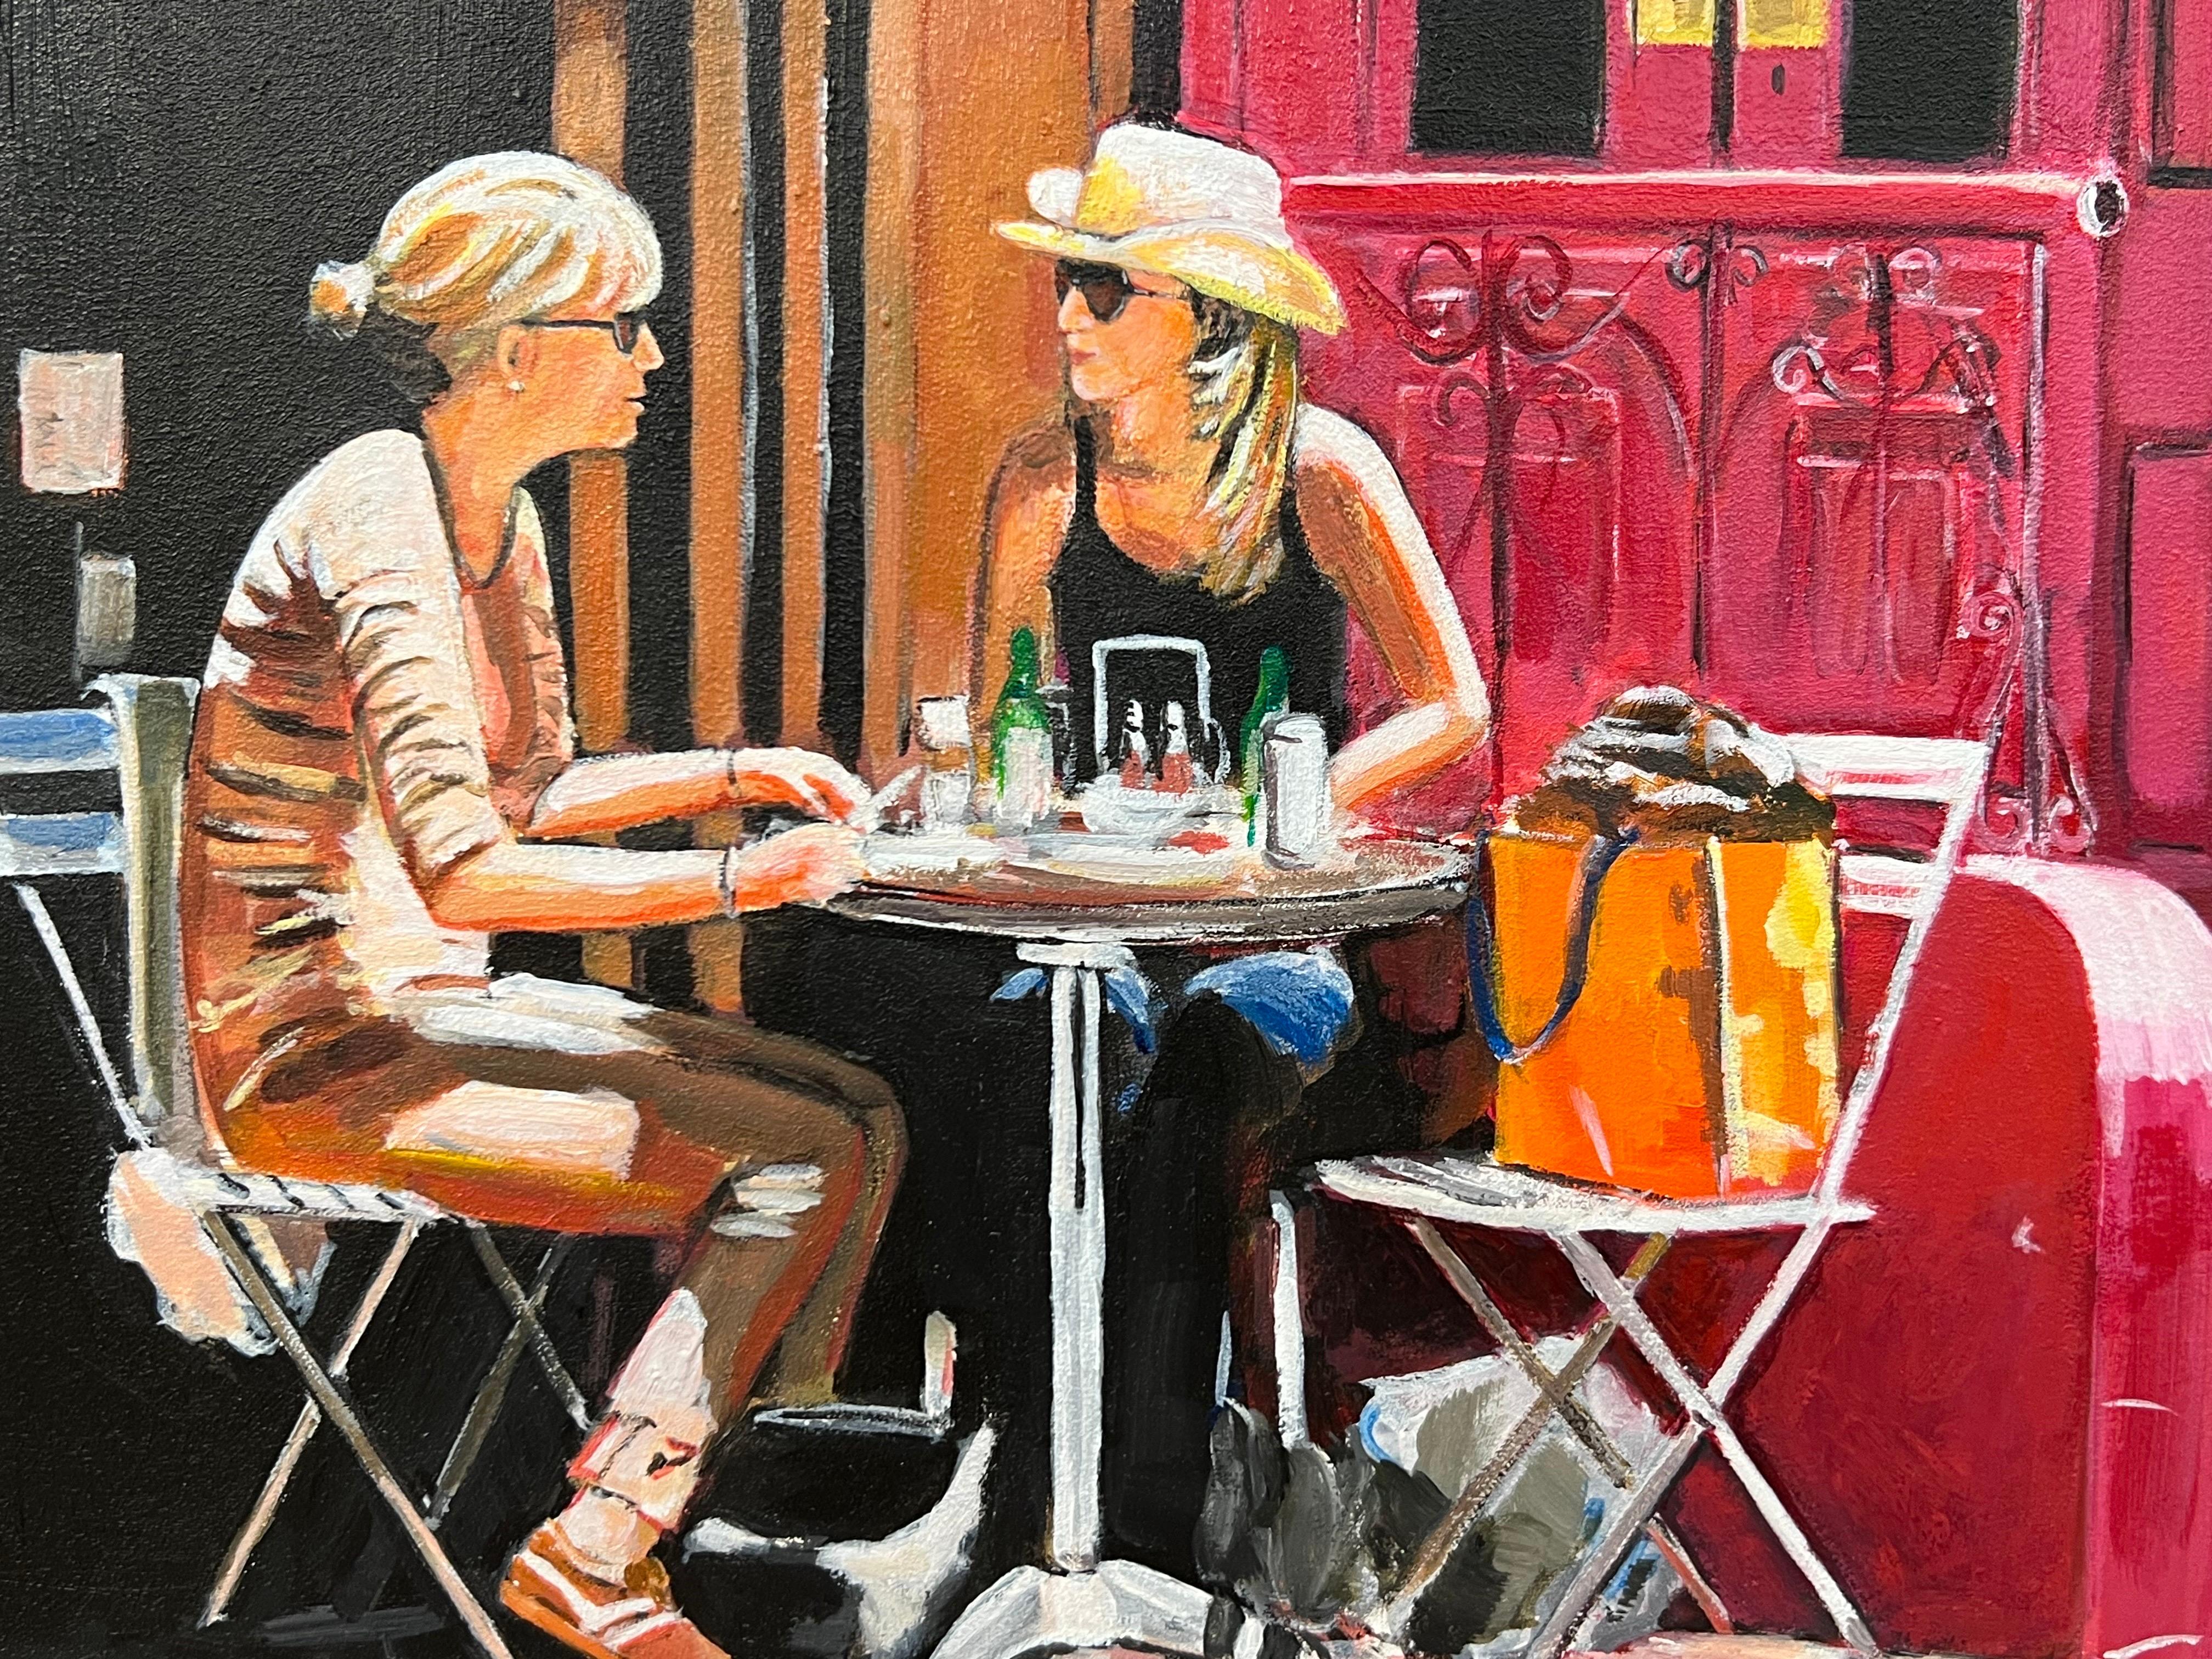 New York City Cafe Borgia with Female Figures by Contemporary British Artist For Sale 1